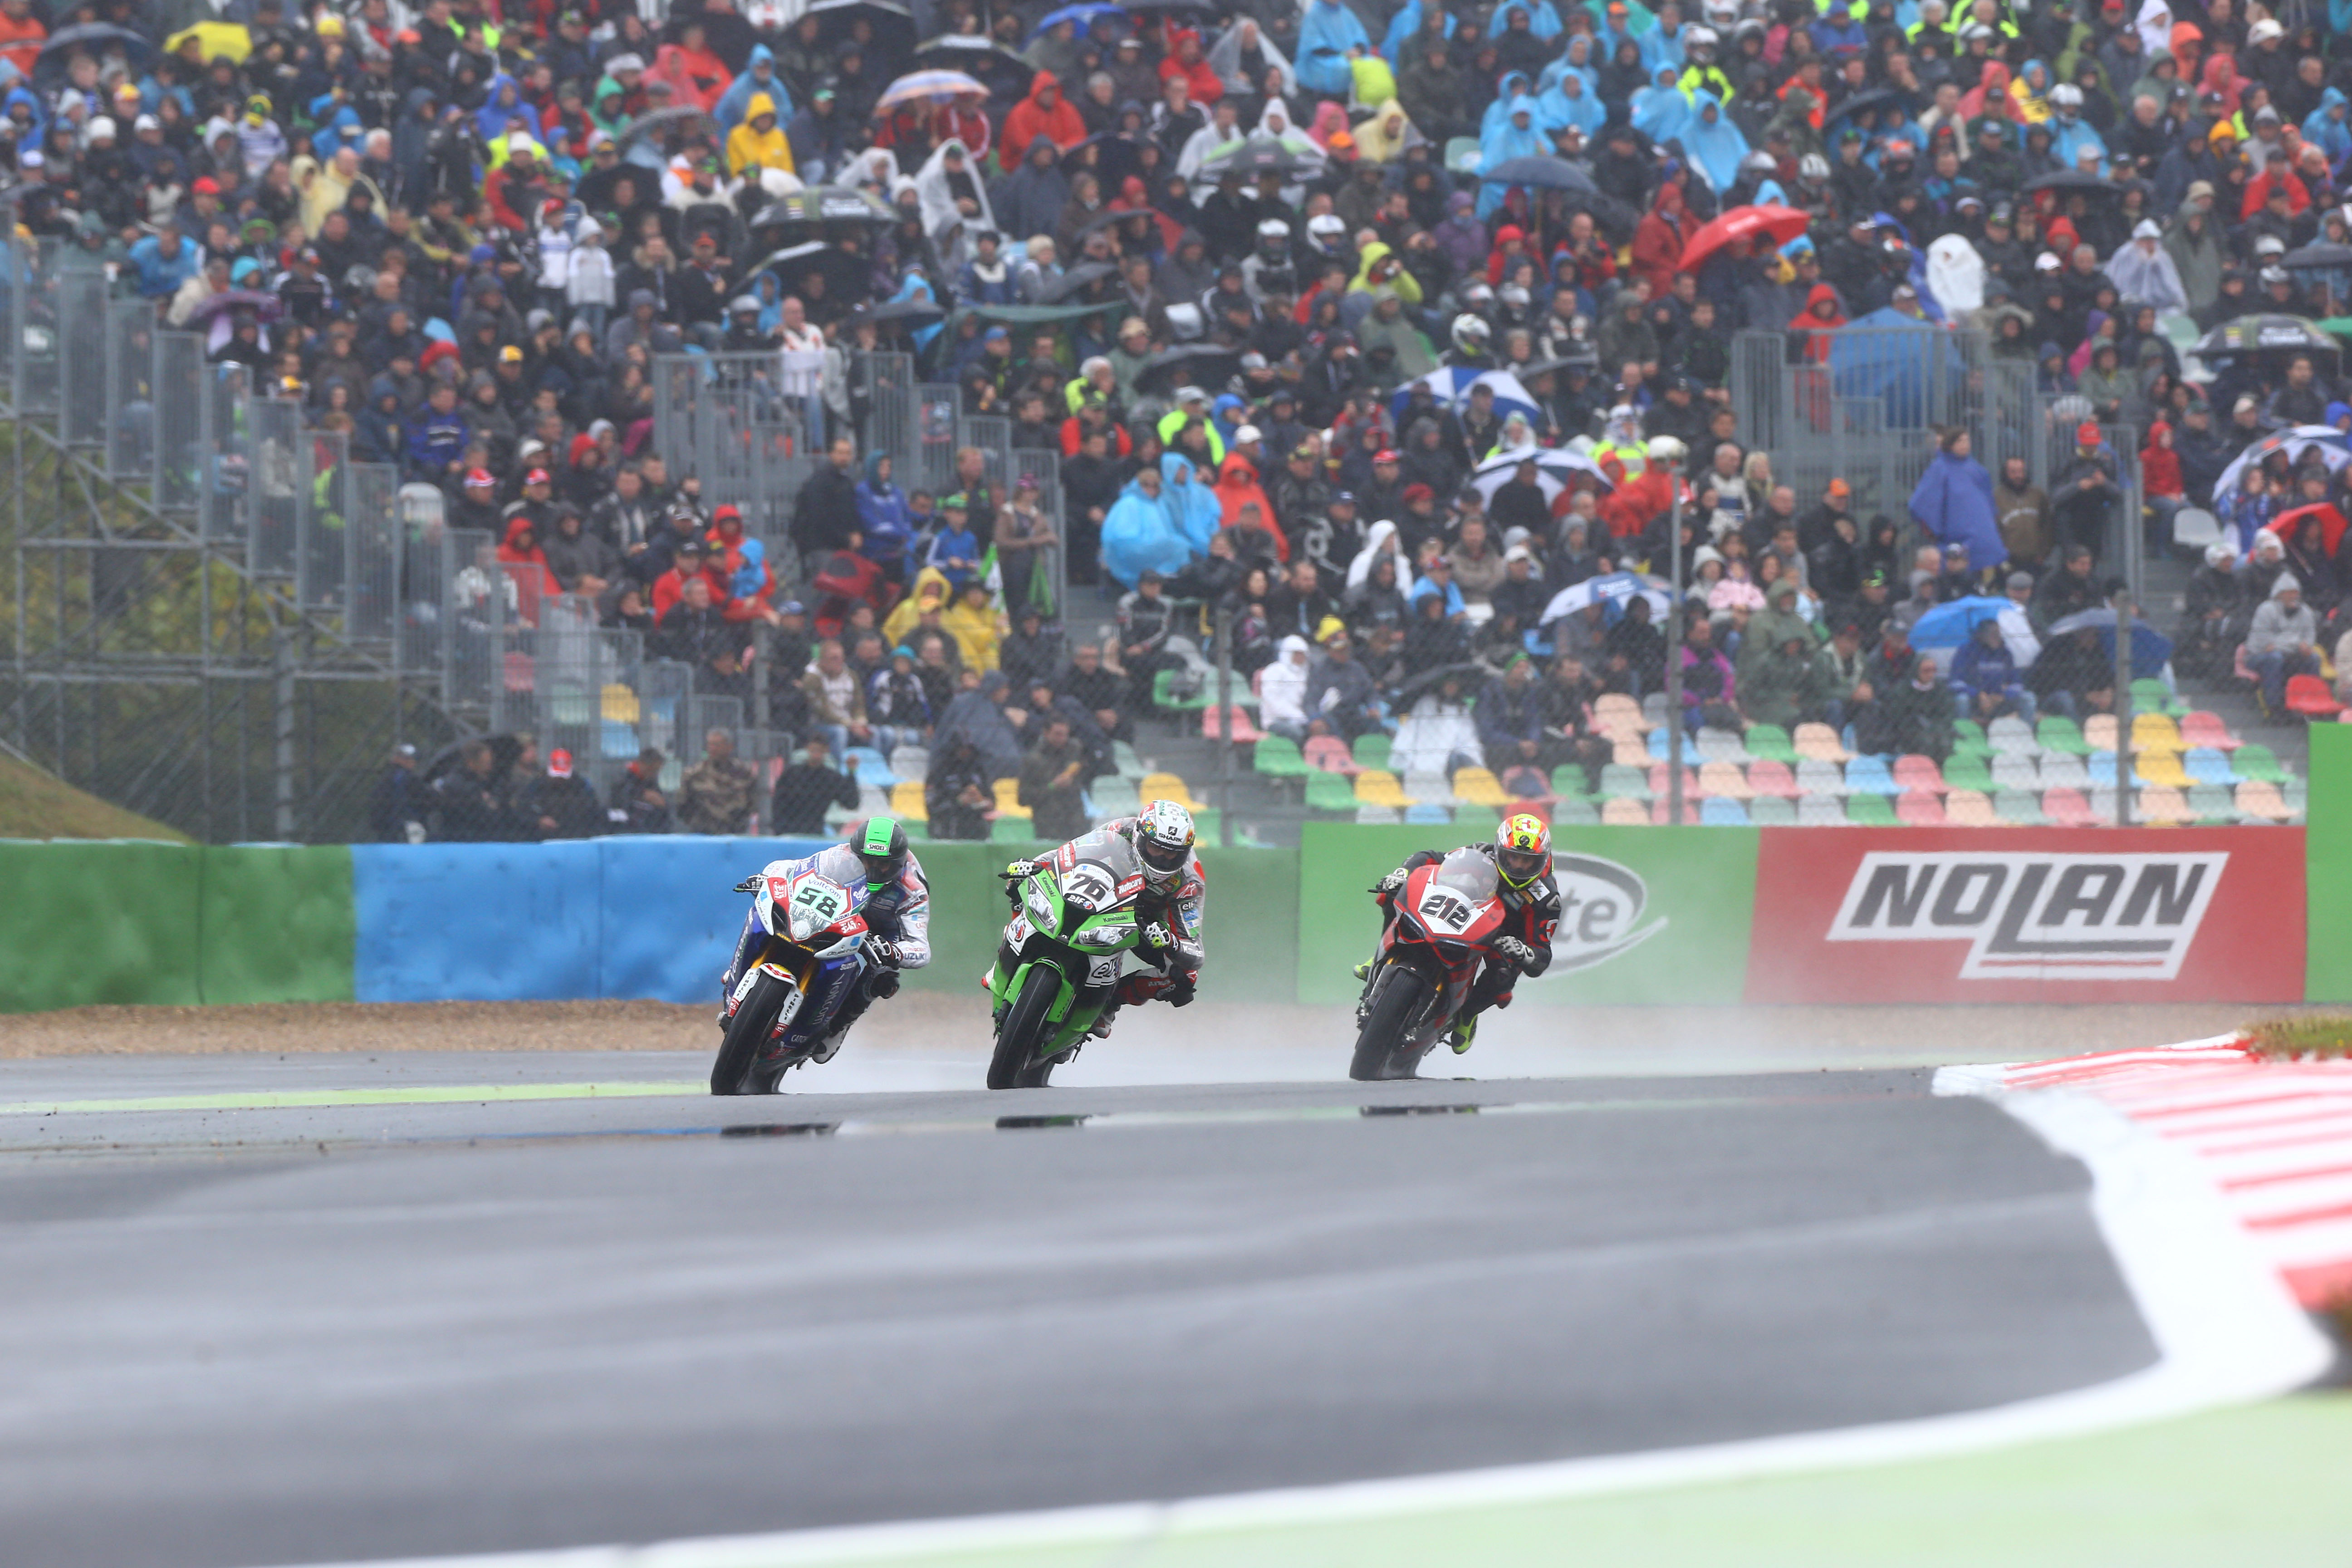 WSB 2014: Magny-Cours race 2 results